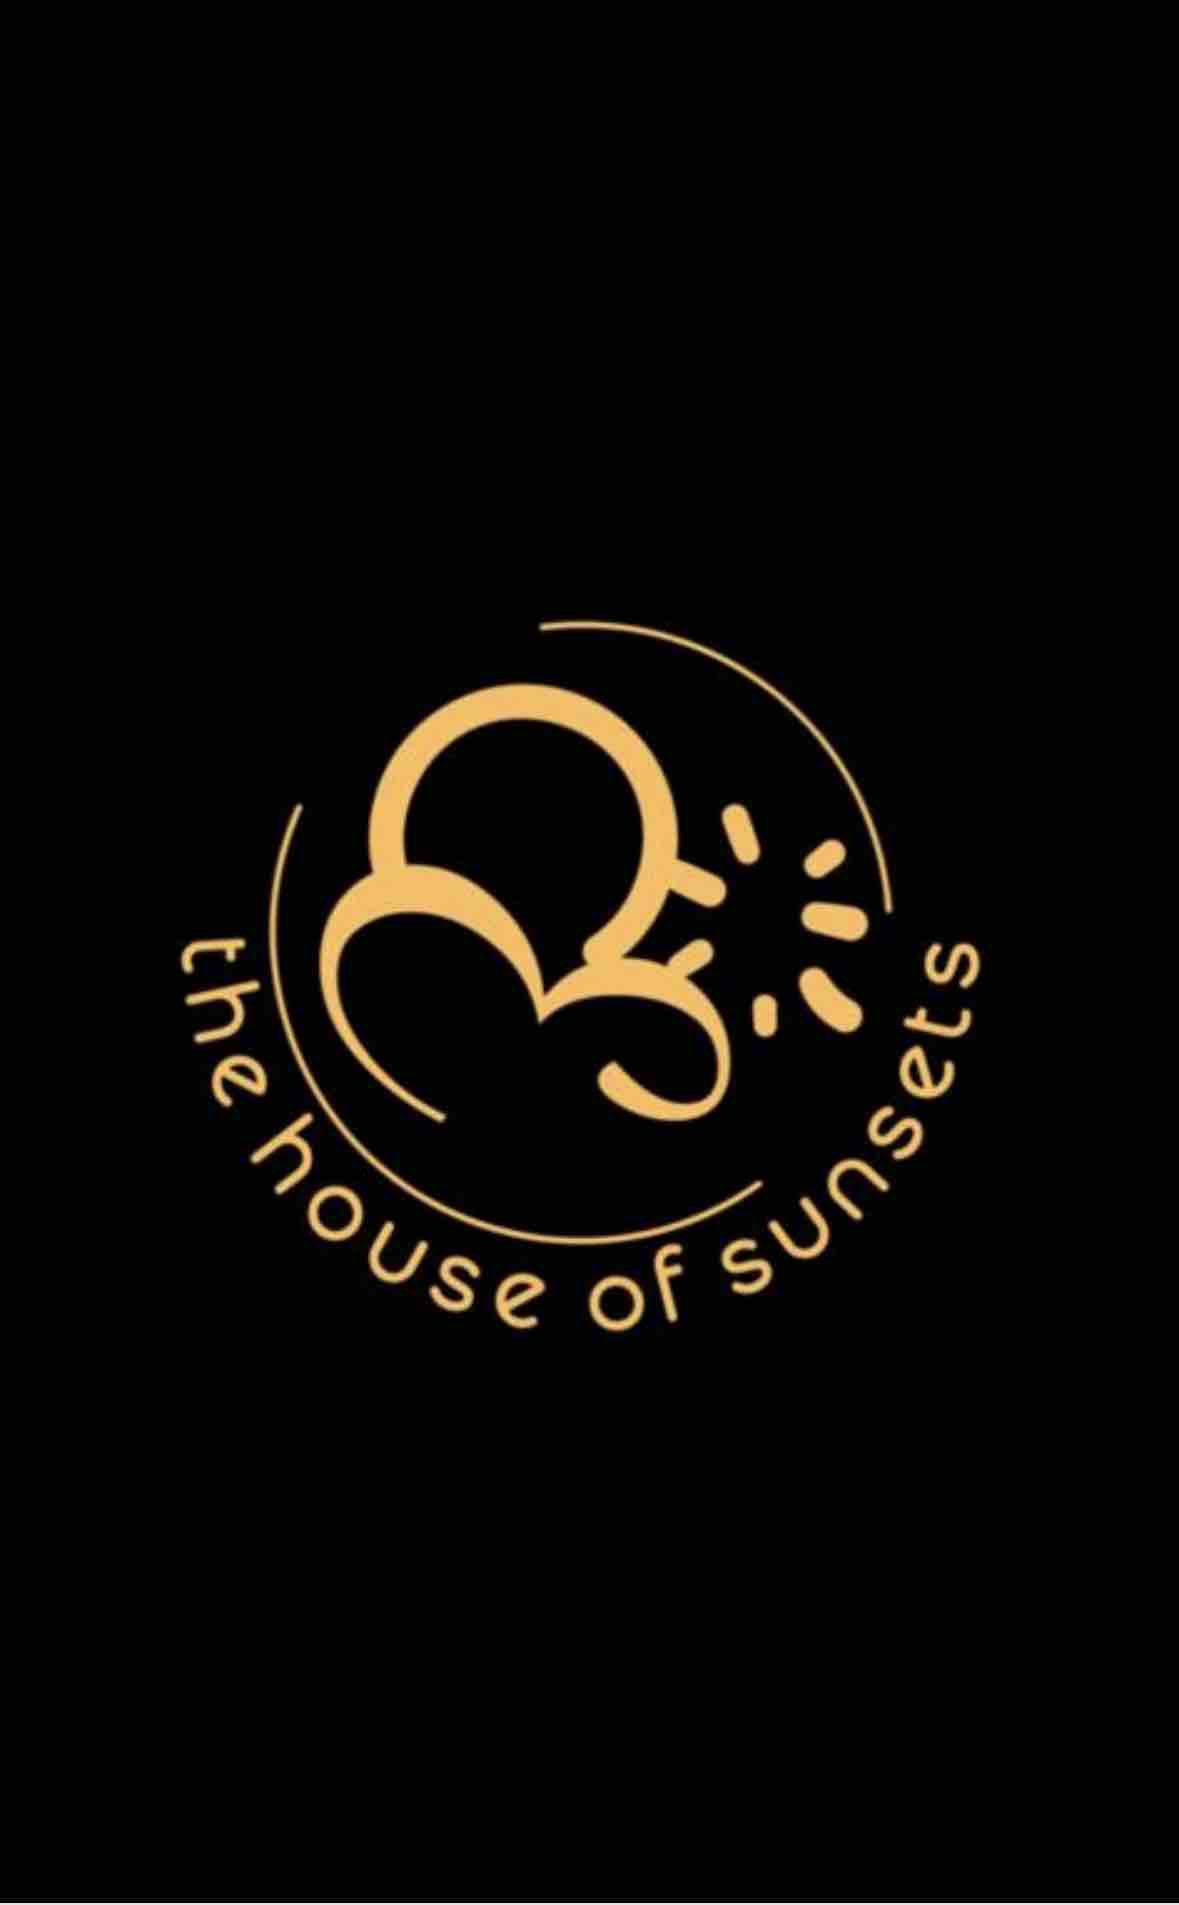 The House of Sunsets